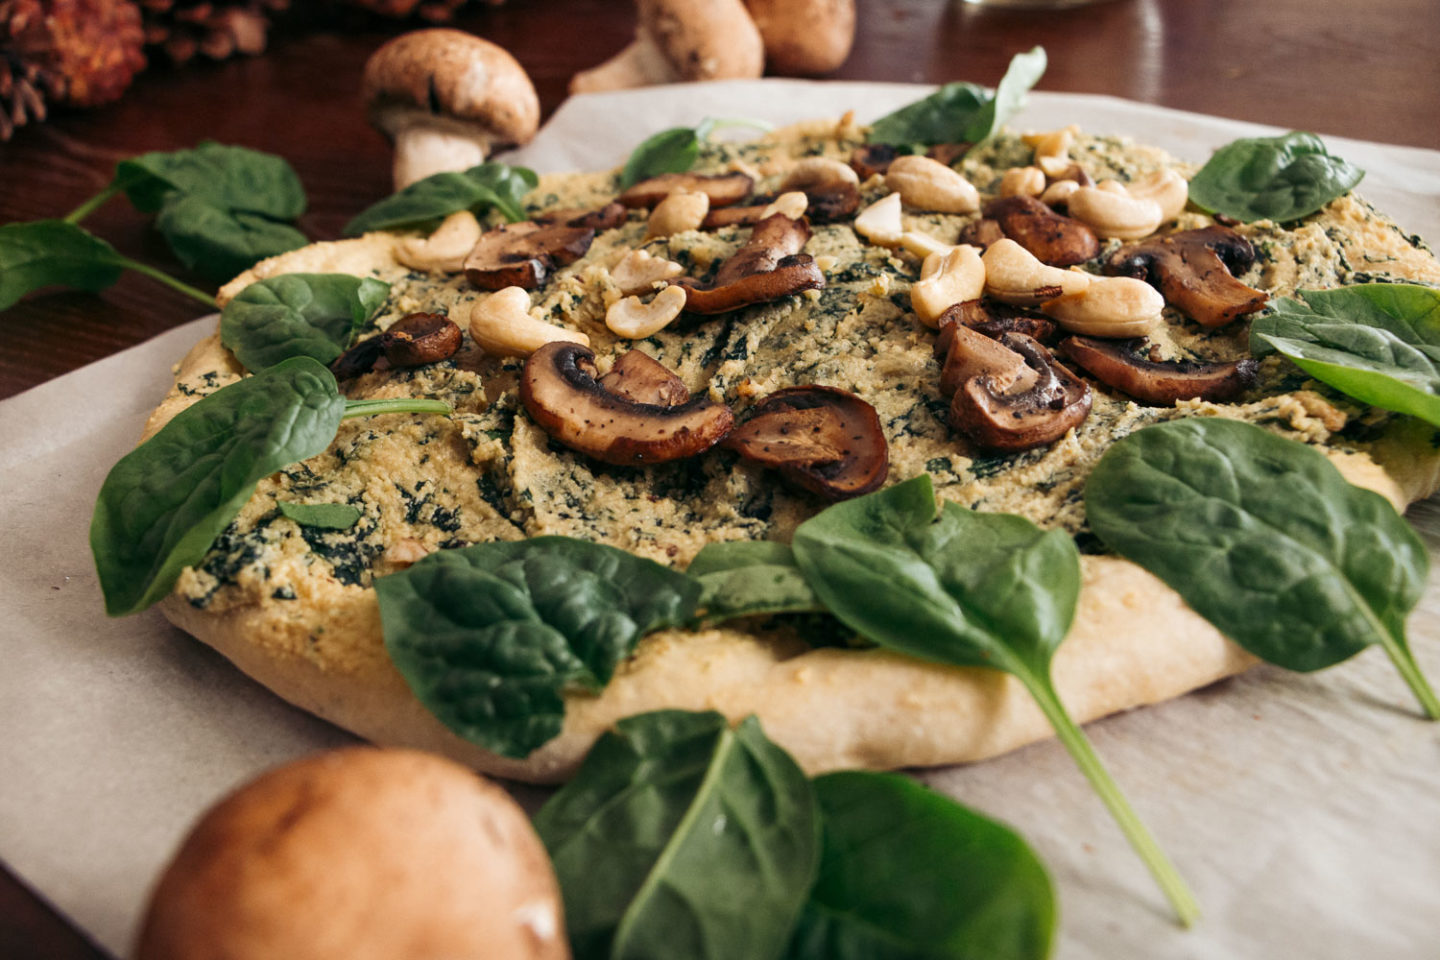 Vegan pizza from scratch - 3 healthy toppings - Roads and Destinations